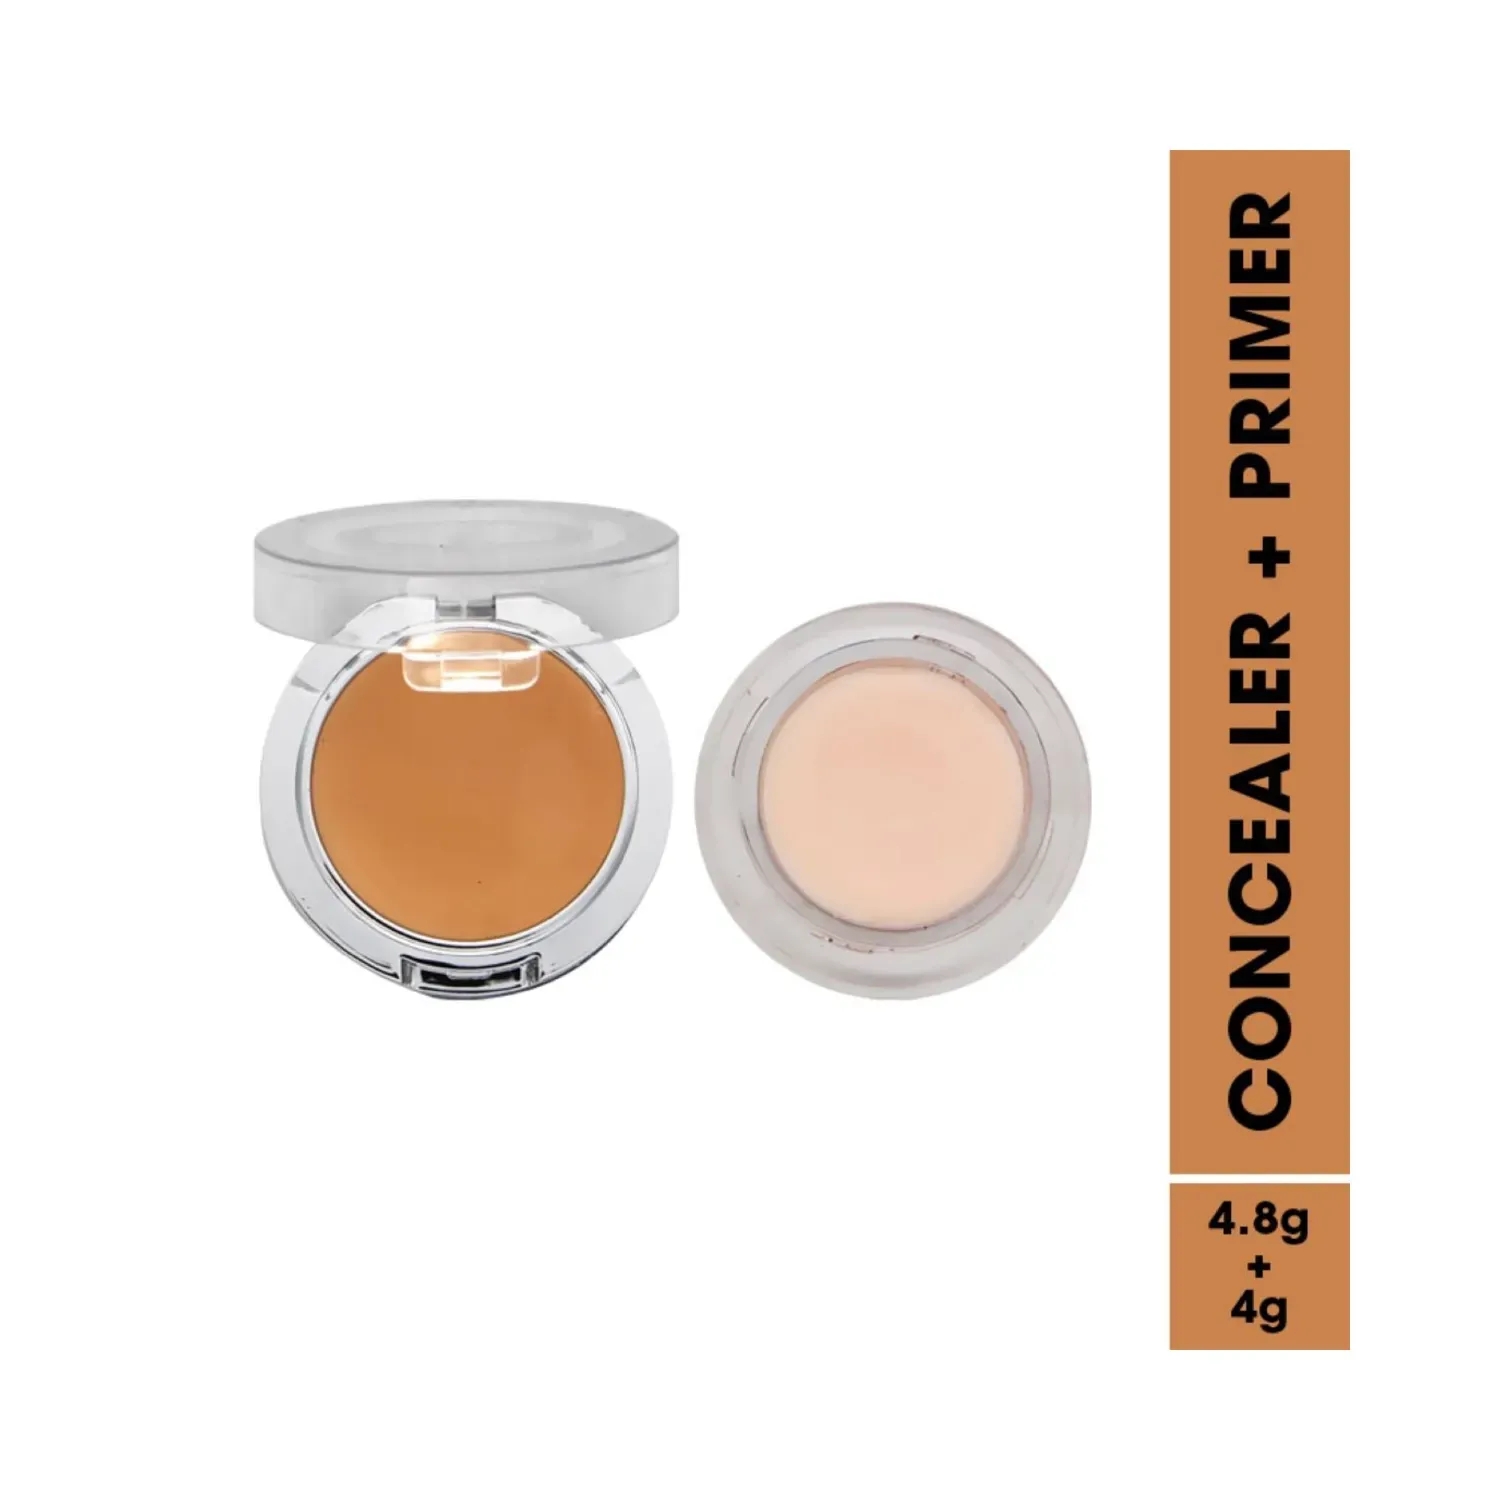 Fashion Colour | Fashion Colour 2-In-1 Primer And Concealer - 01 Shade (4.8g + 4g)